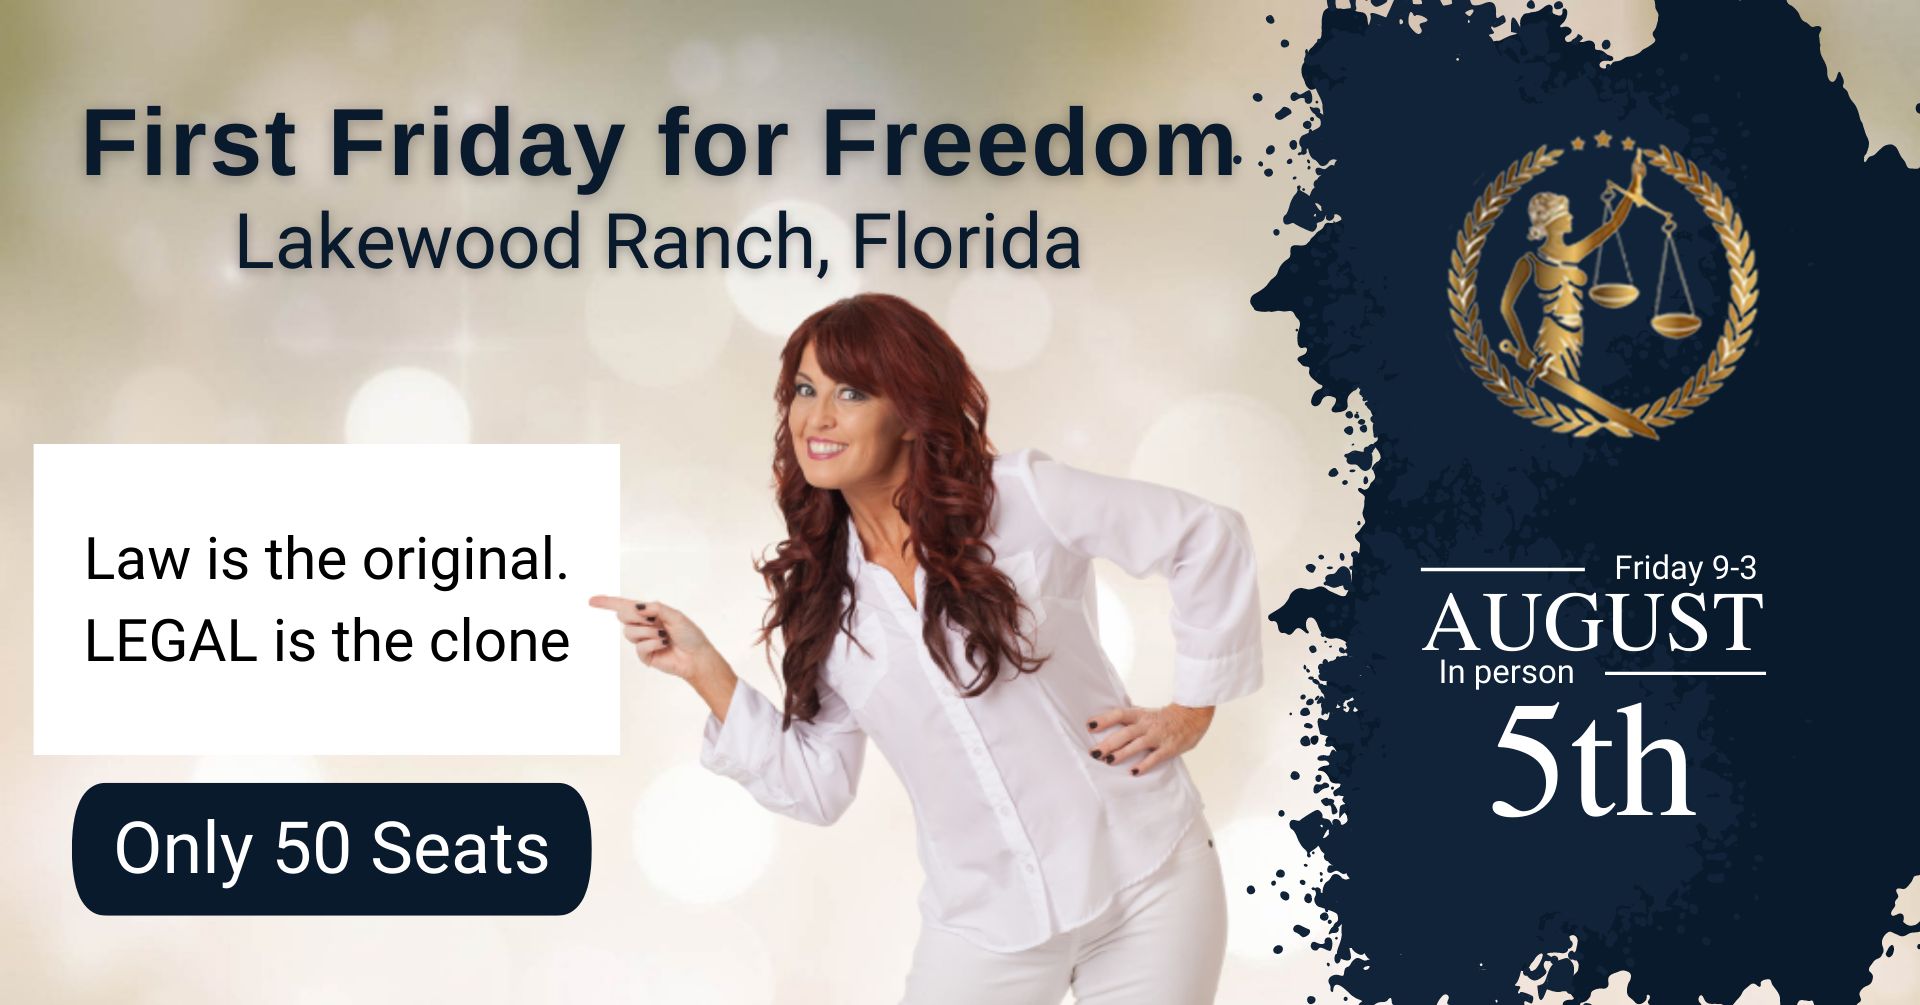 First Friday for Freedom in Florida (August 5th), Bradenton, Florida, United States